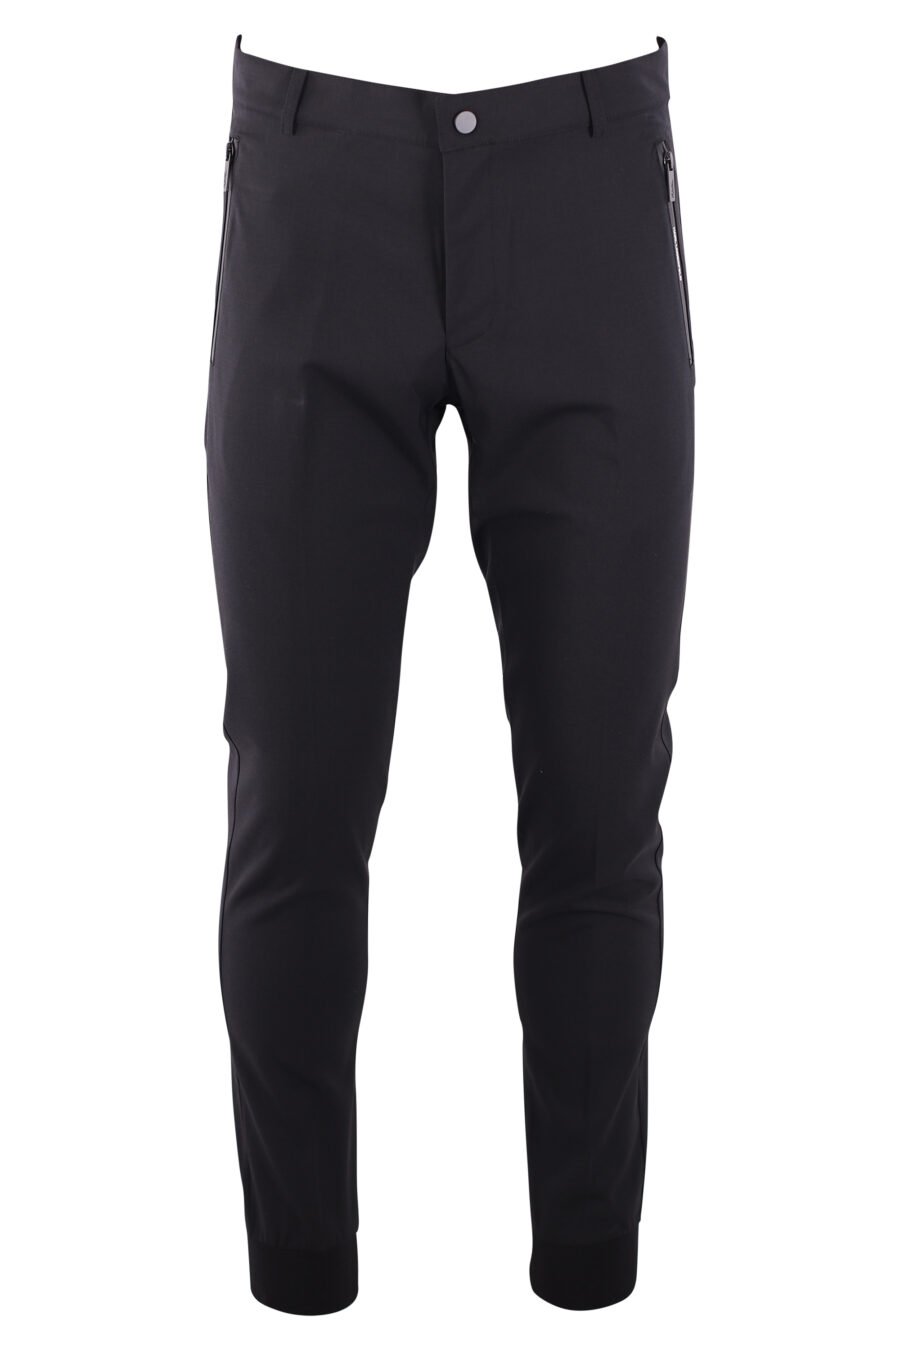 Black trousers with logo on zip - IMG 3230